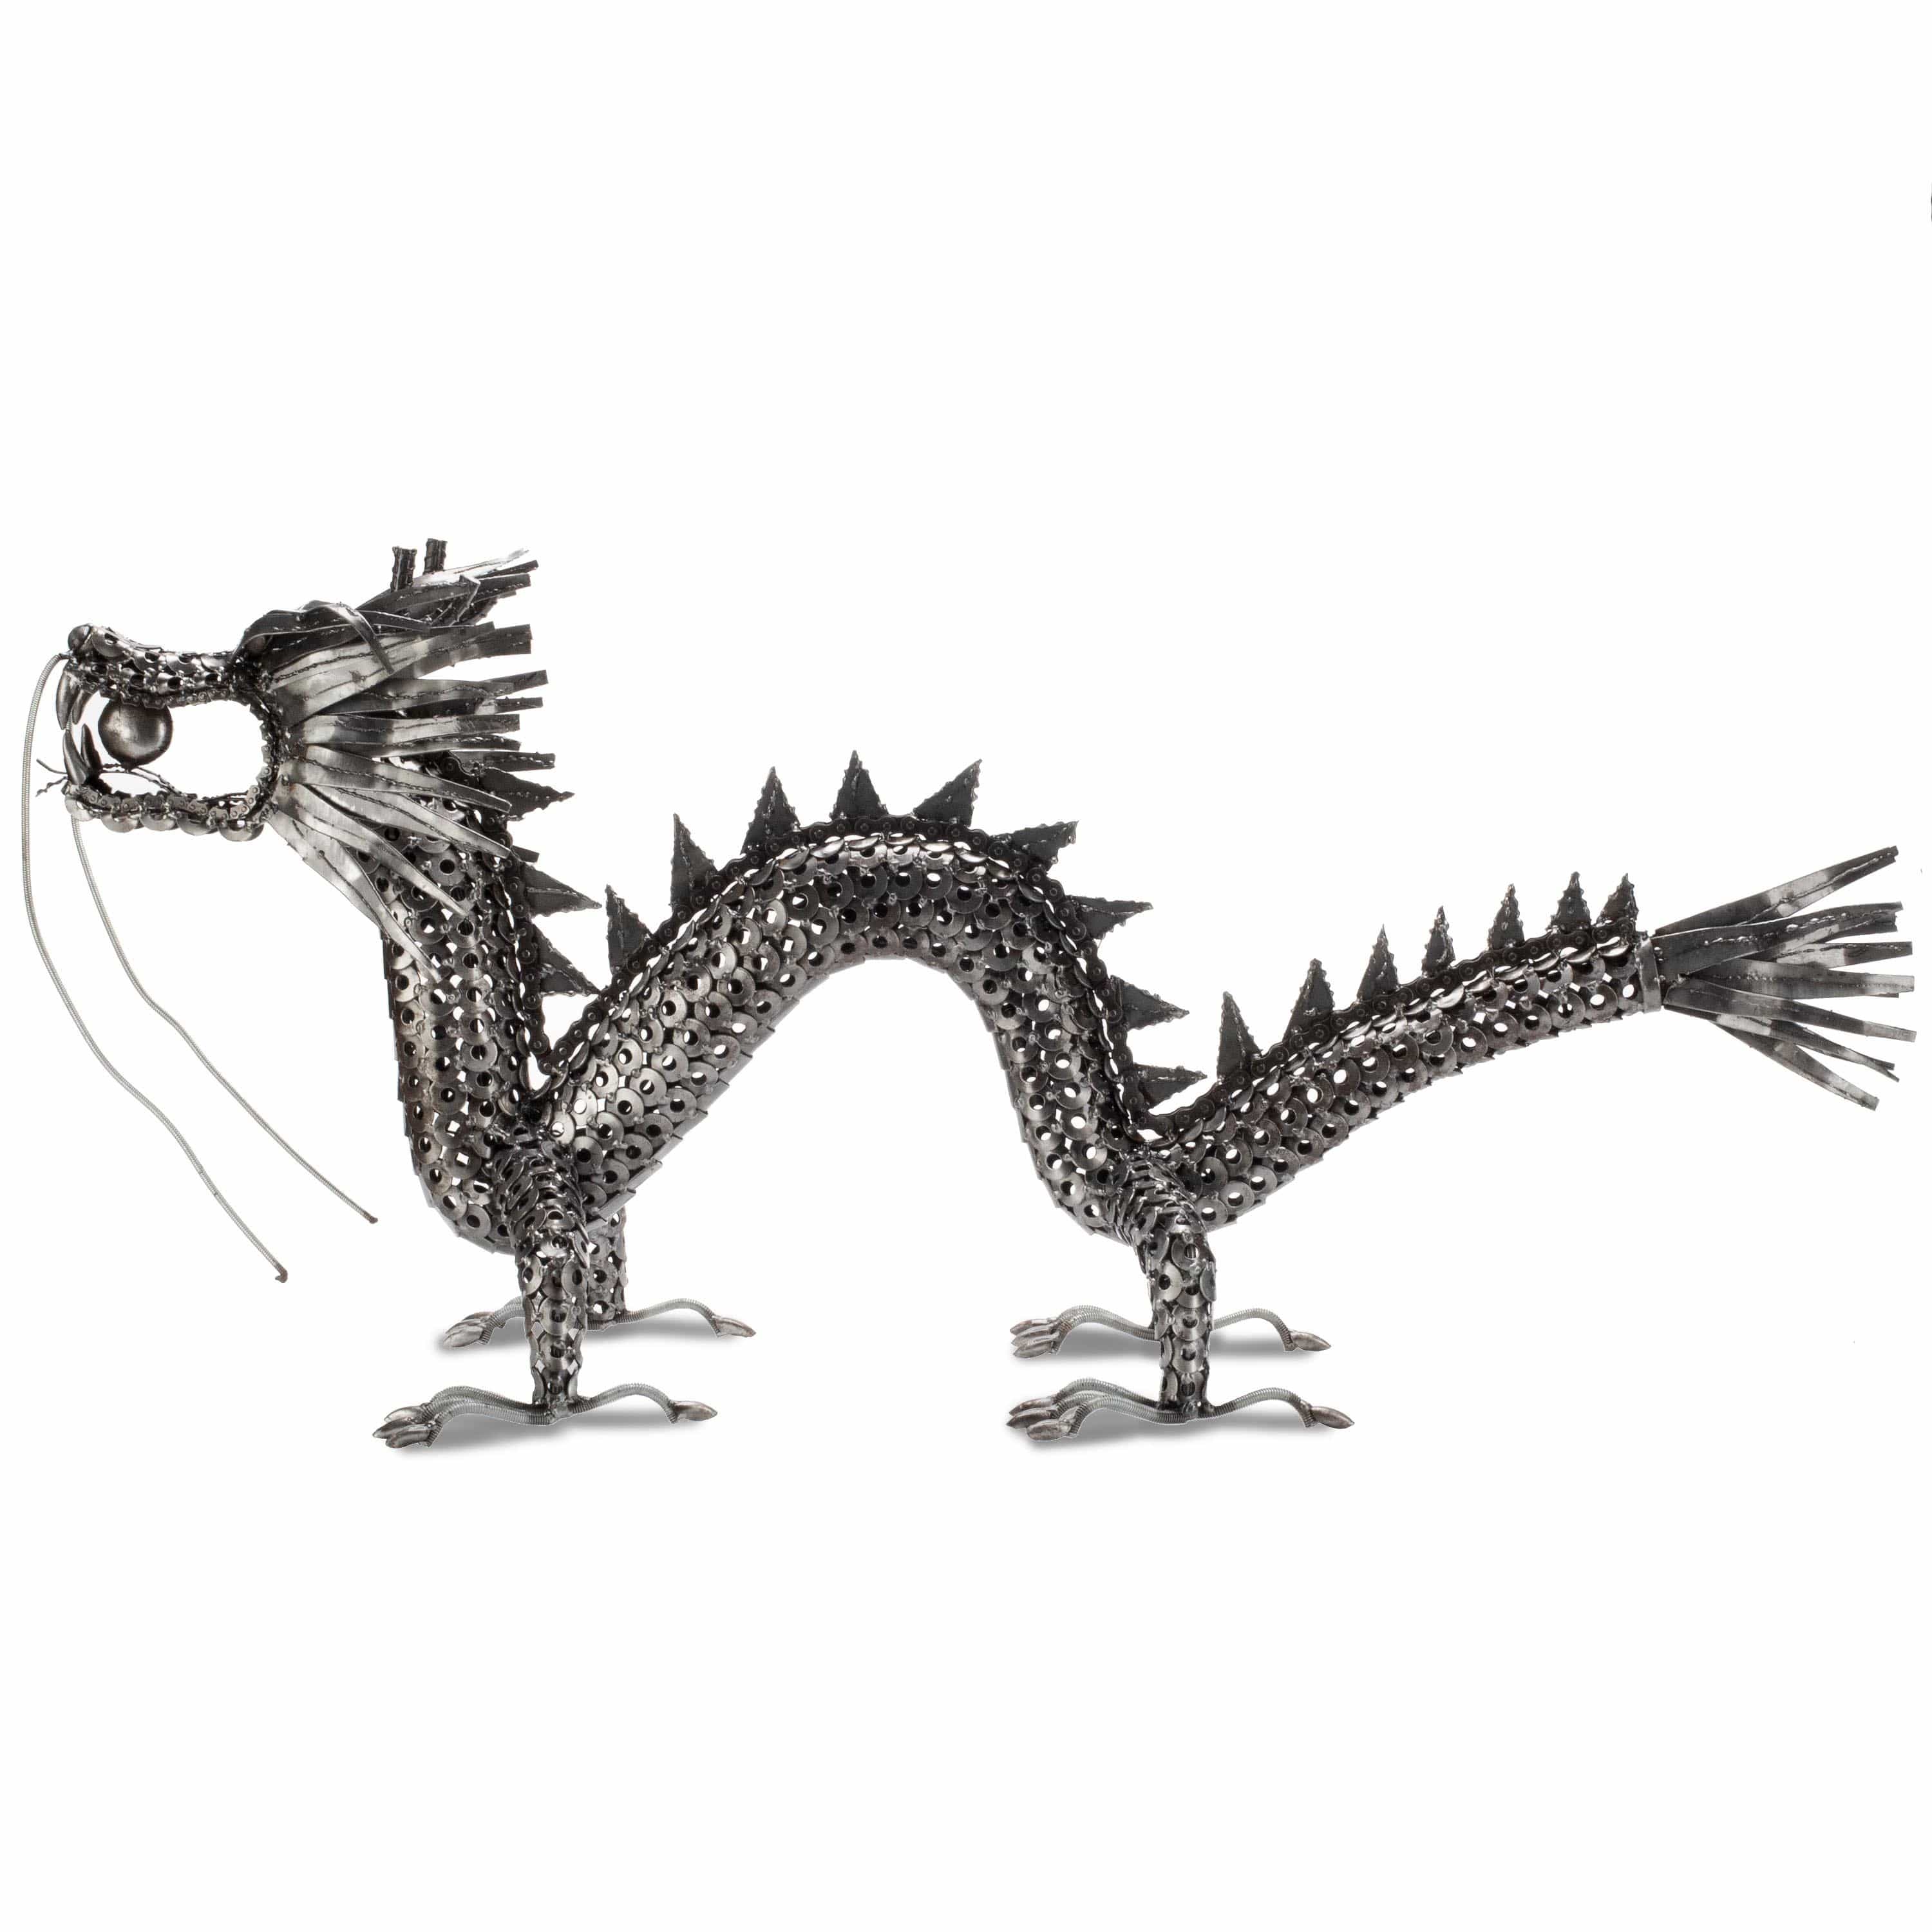 Kalifano Recycled Metal Art Chinese Dragon Inspired Recycled Metal Art Sculpture - RMS-CD45-Y